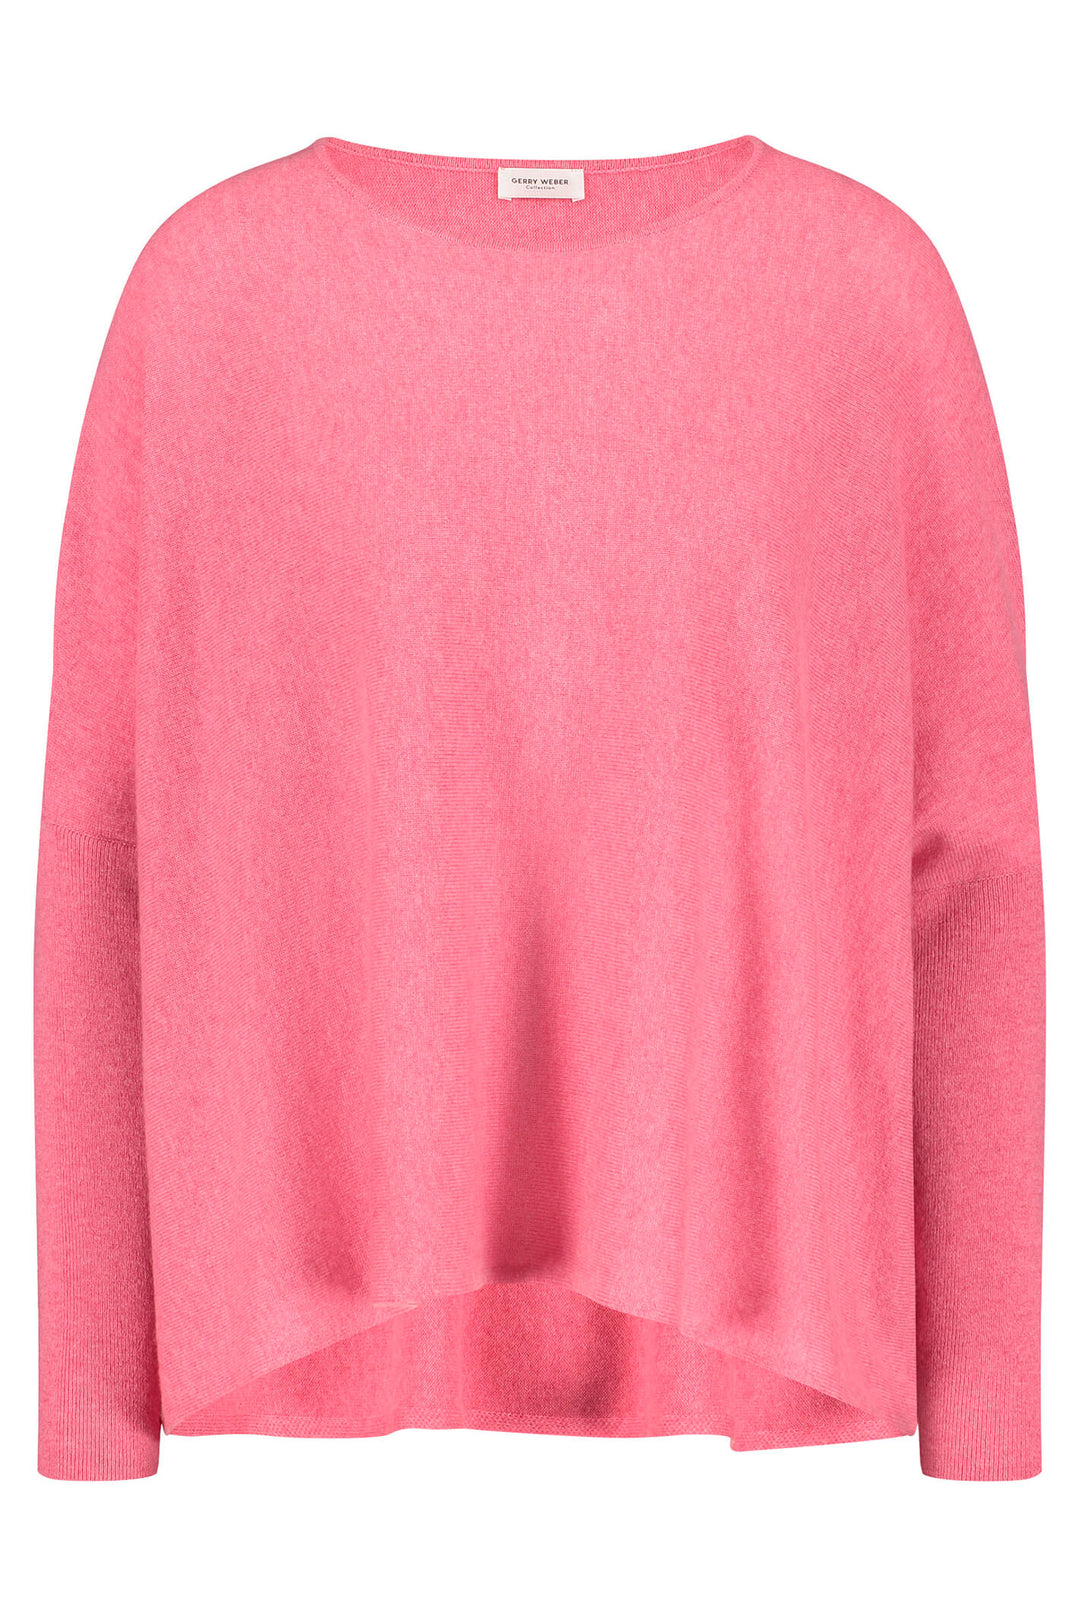 Gerry Weber 871014 Rose Pink Knitted Jumper - Experience Boutique